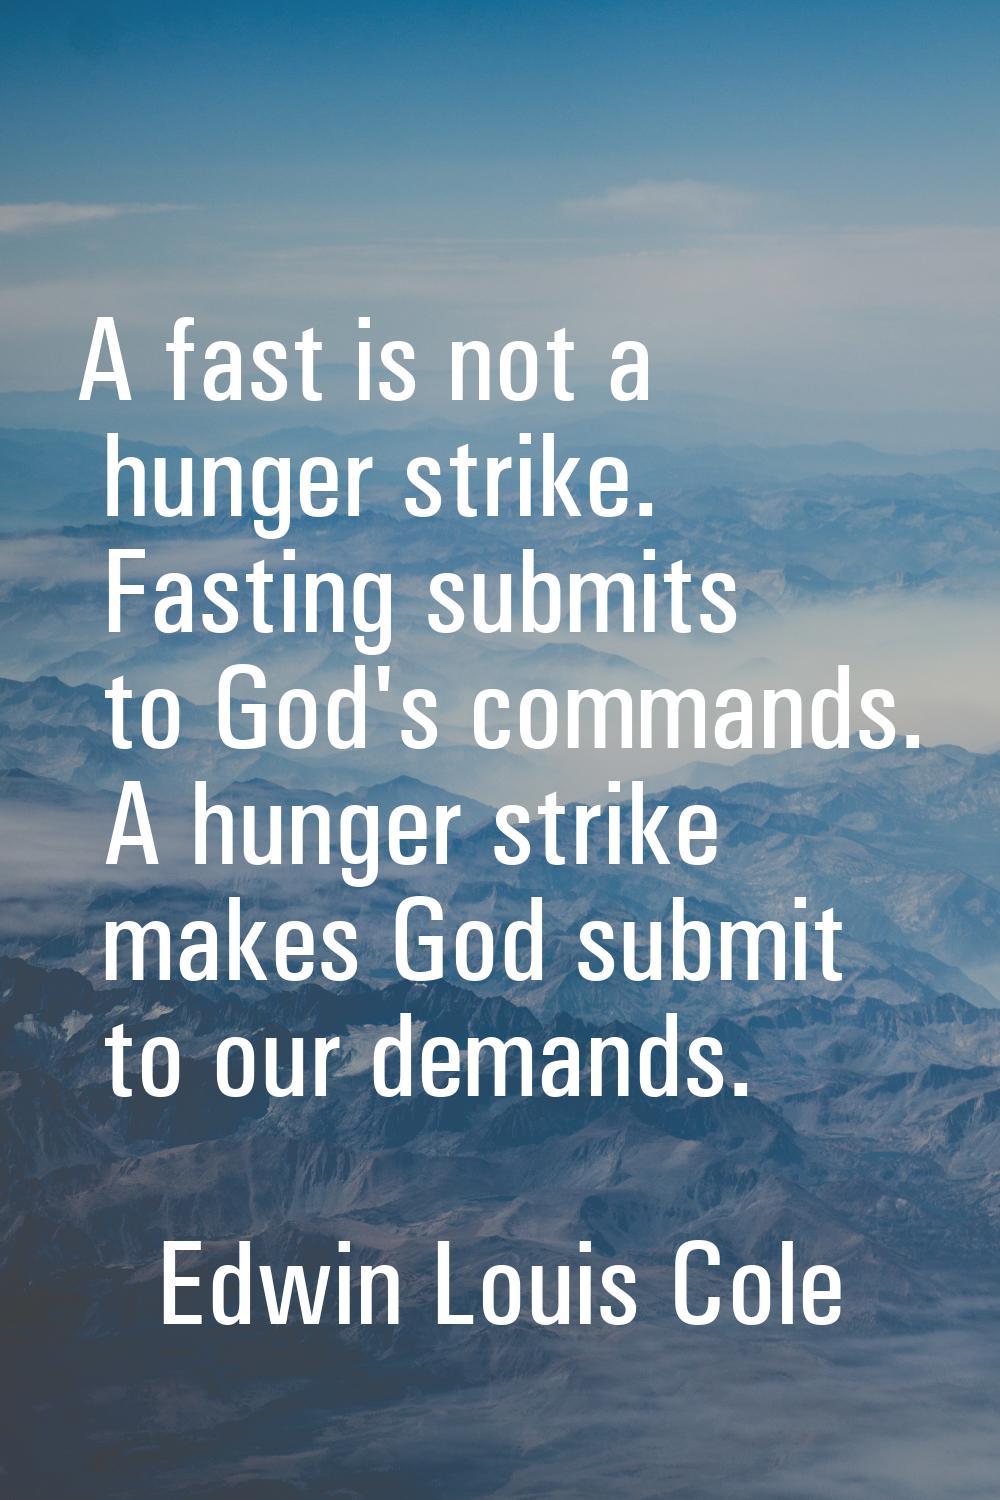 A fast is not a hunger strike. Fasting submits to God's commands. A hunger strike makes God submit 